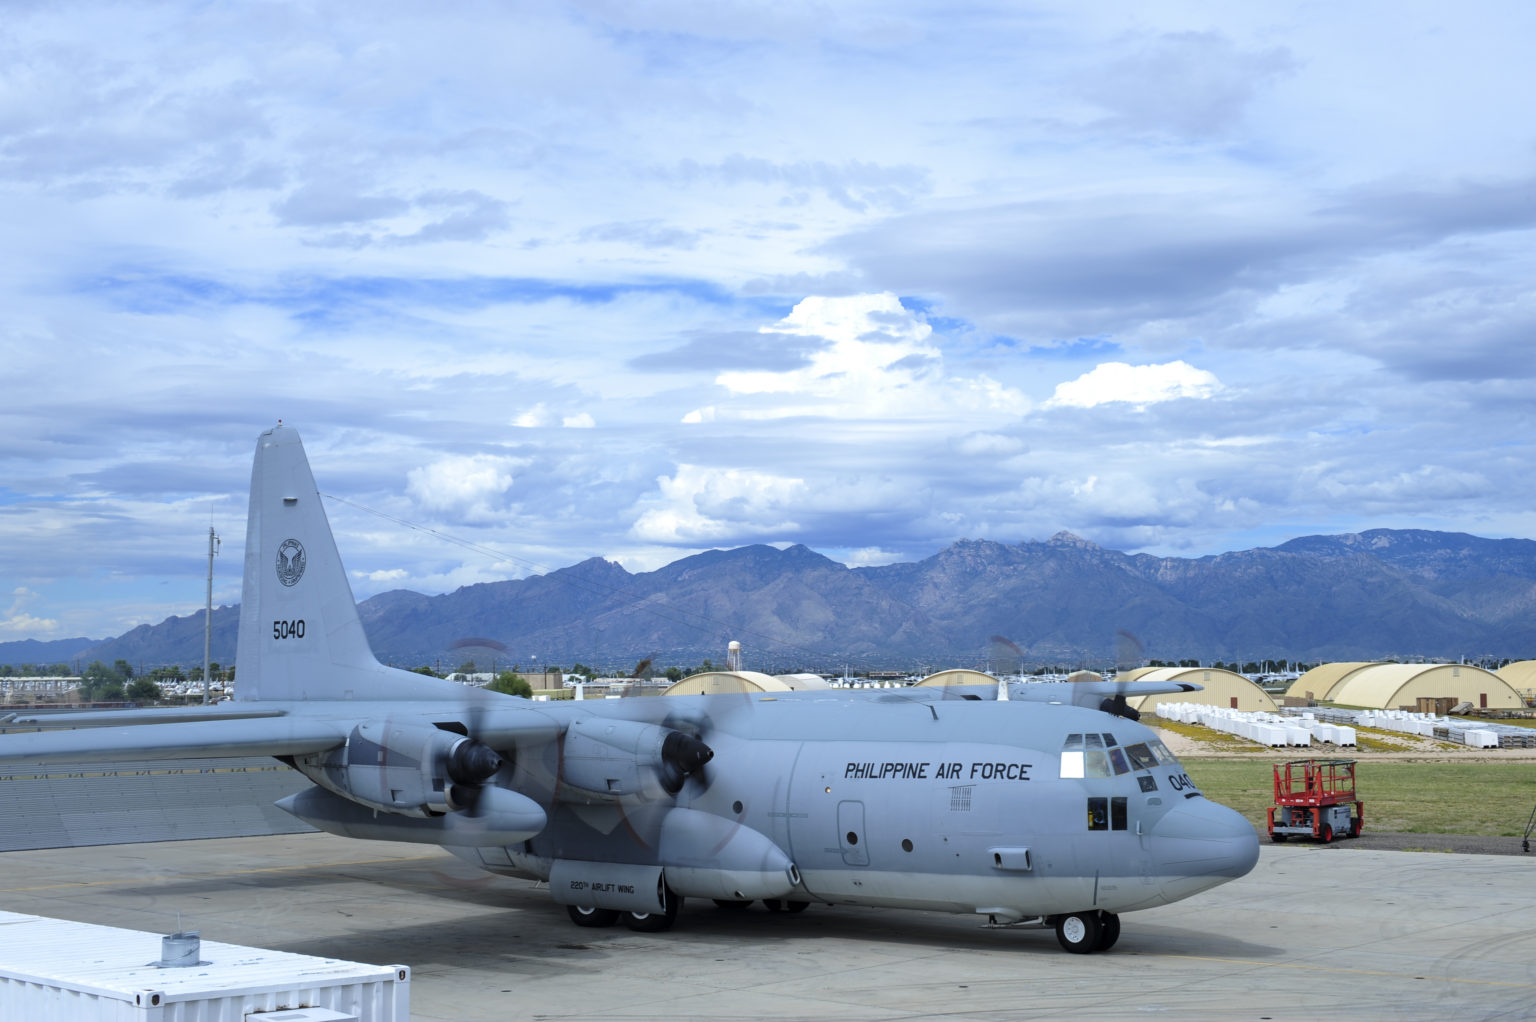 Philippine Air Force to take delivery of C-130 this month.